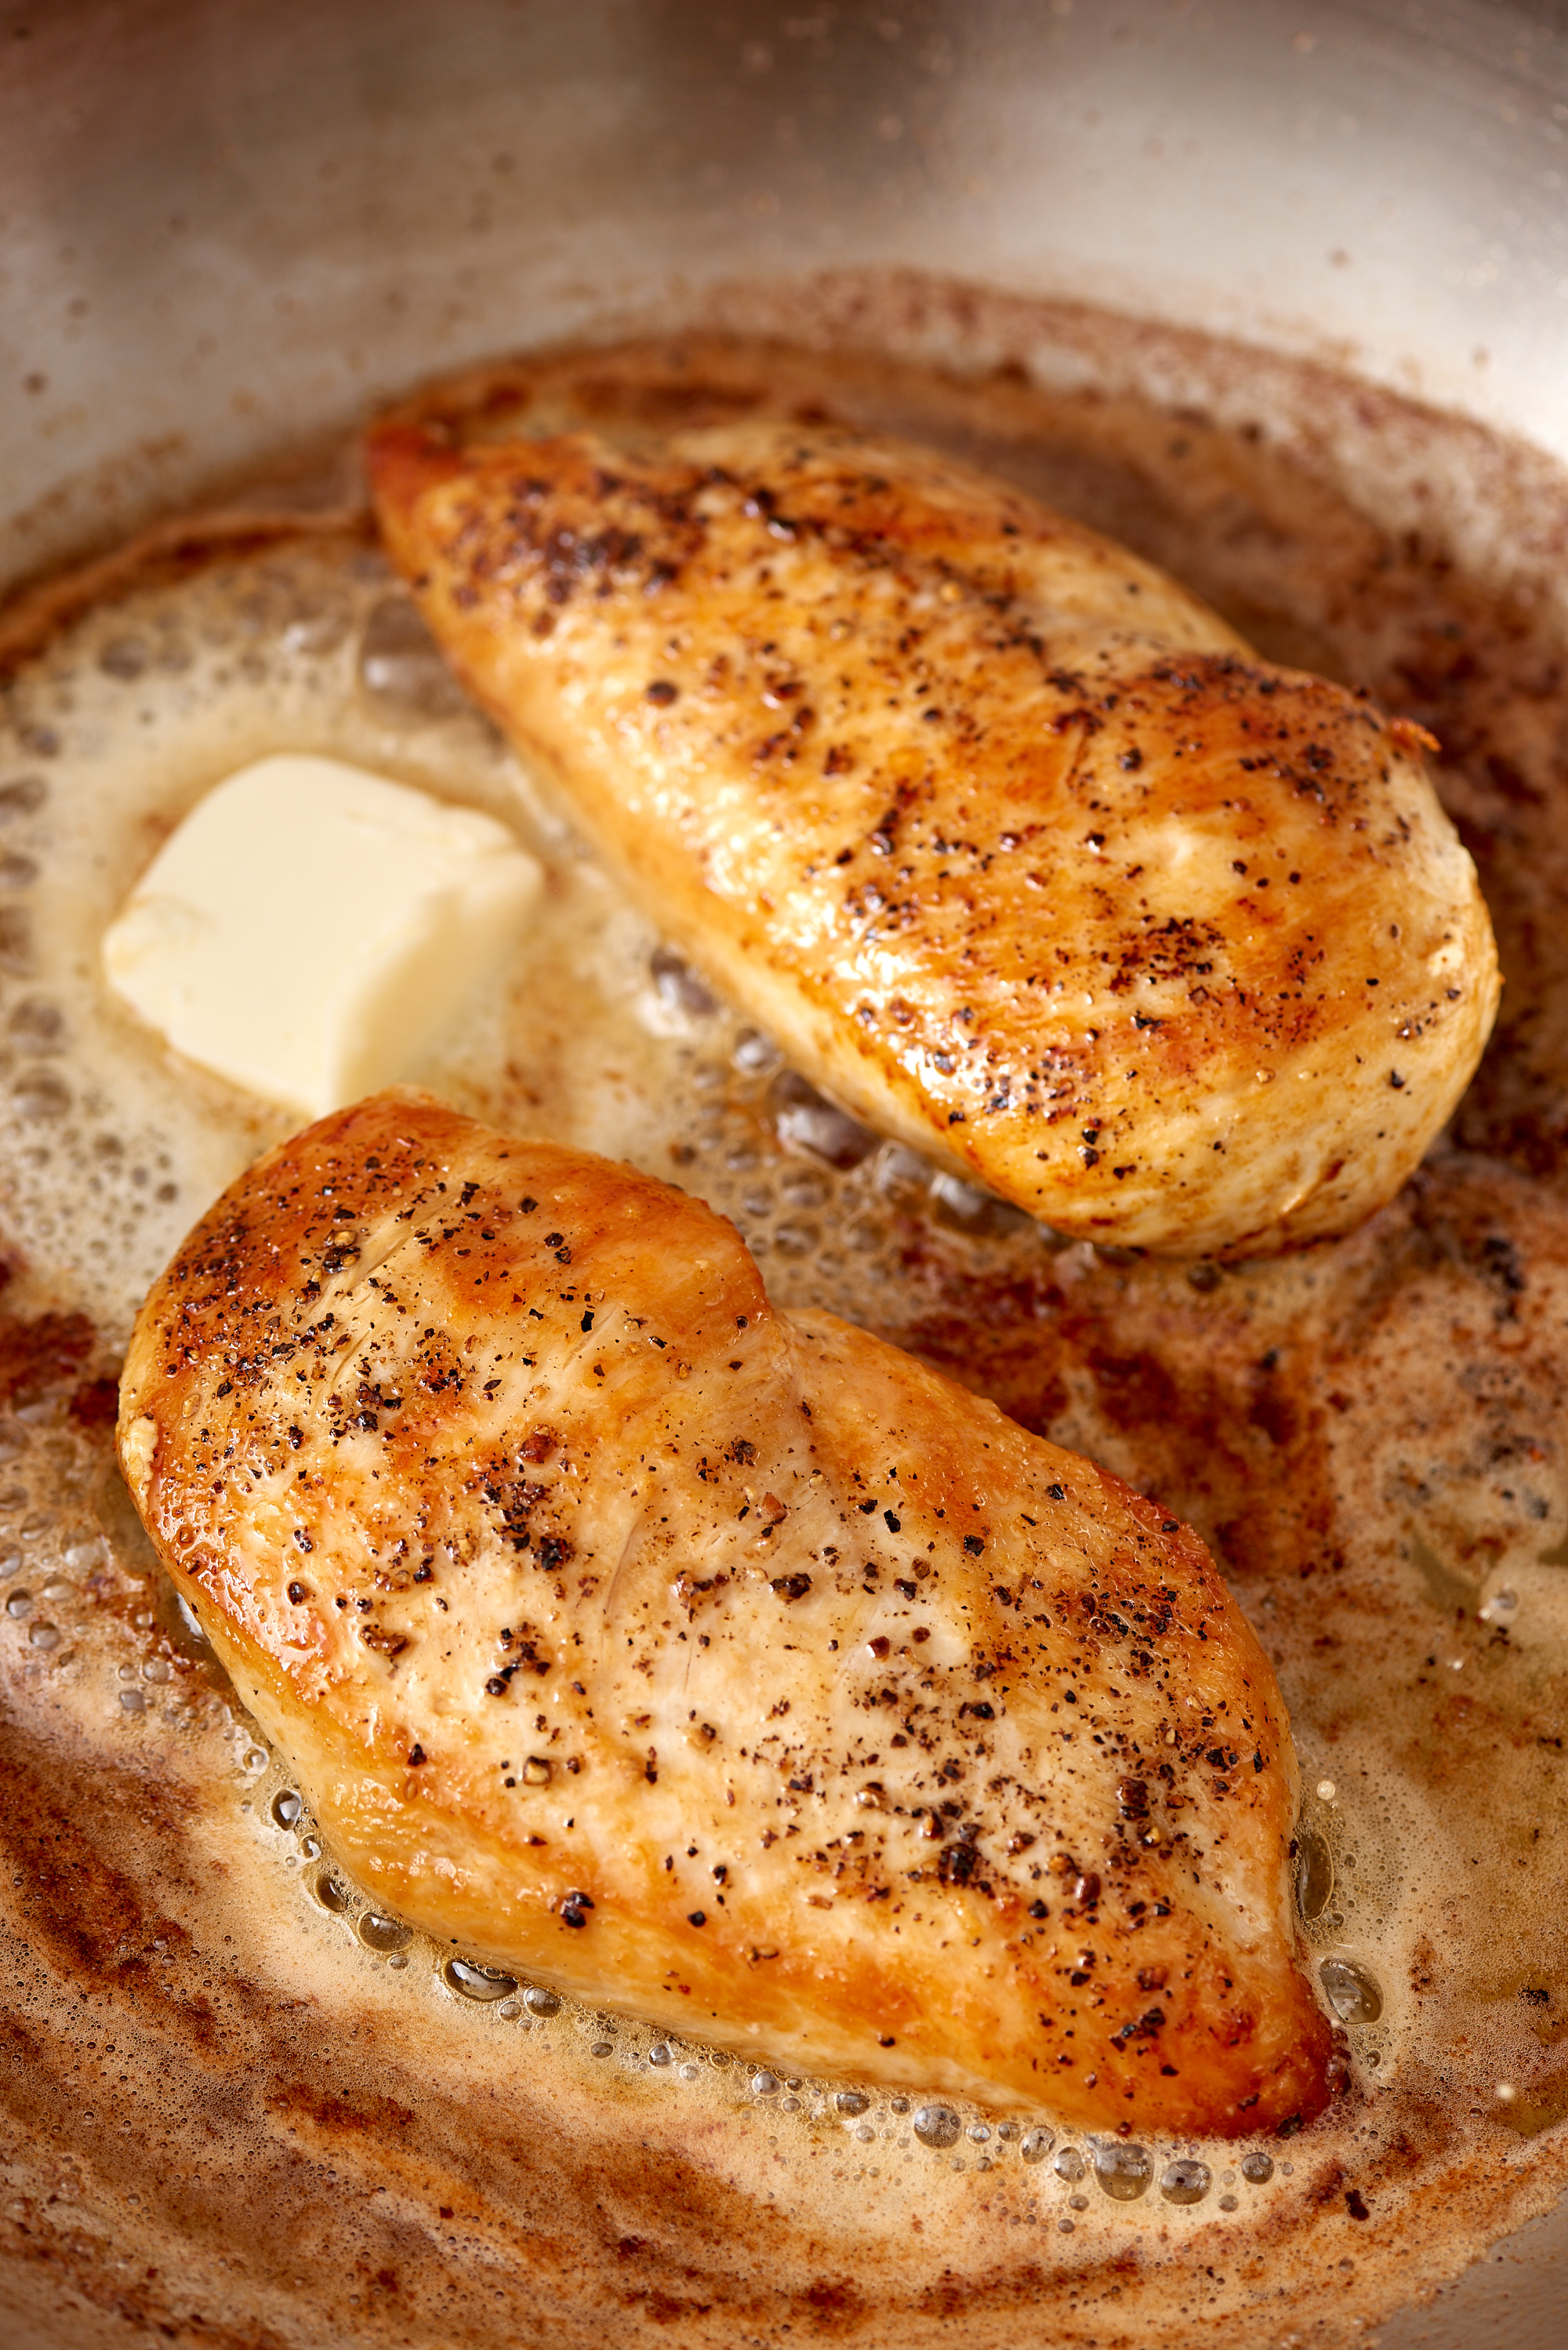 Improve Your Chicken Breasts - Learn To Cook